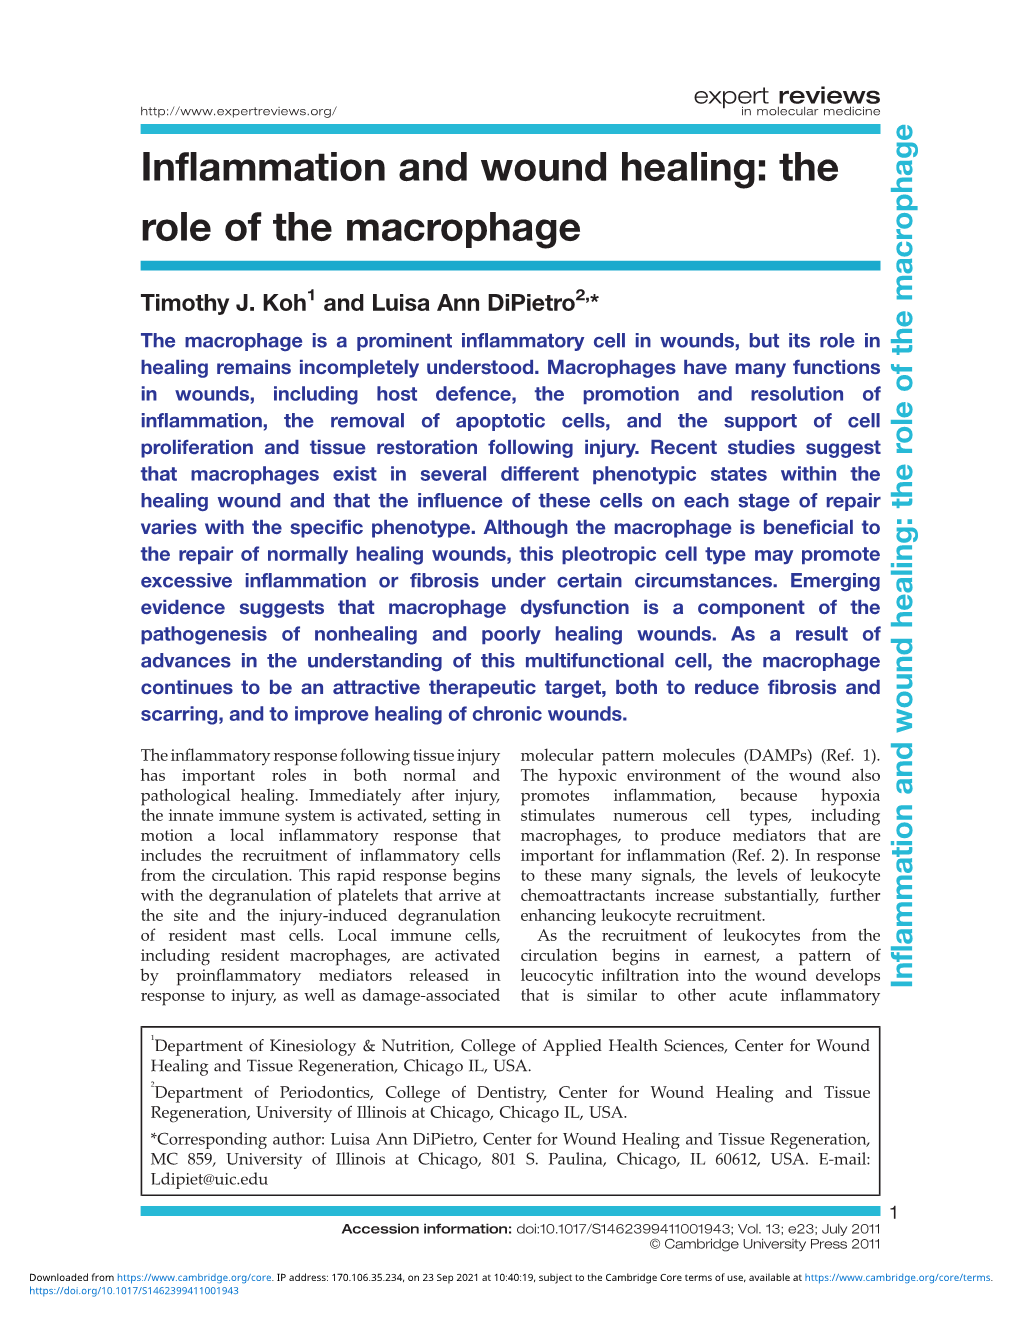 Inflammation and Wound Healing: the Role of the Macrophage